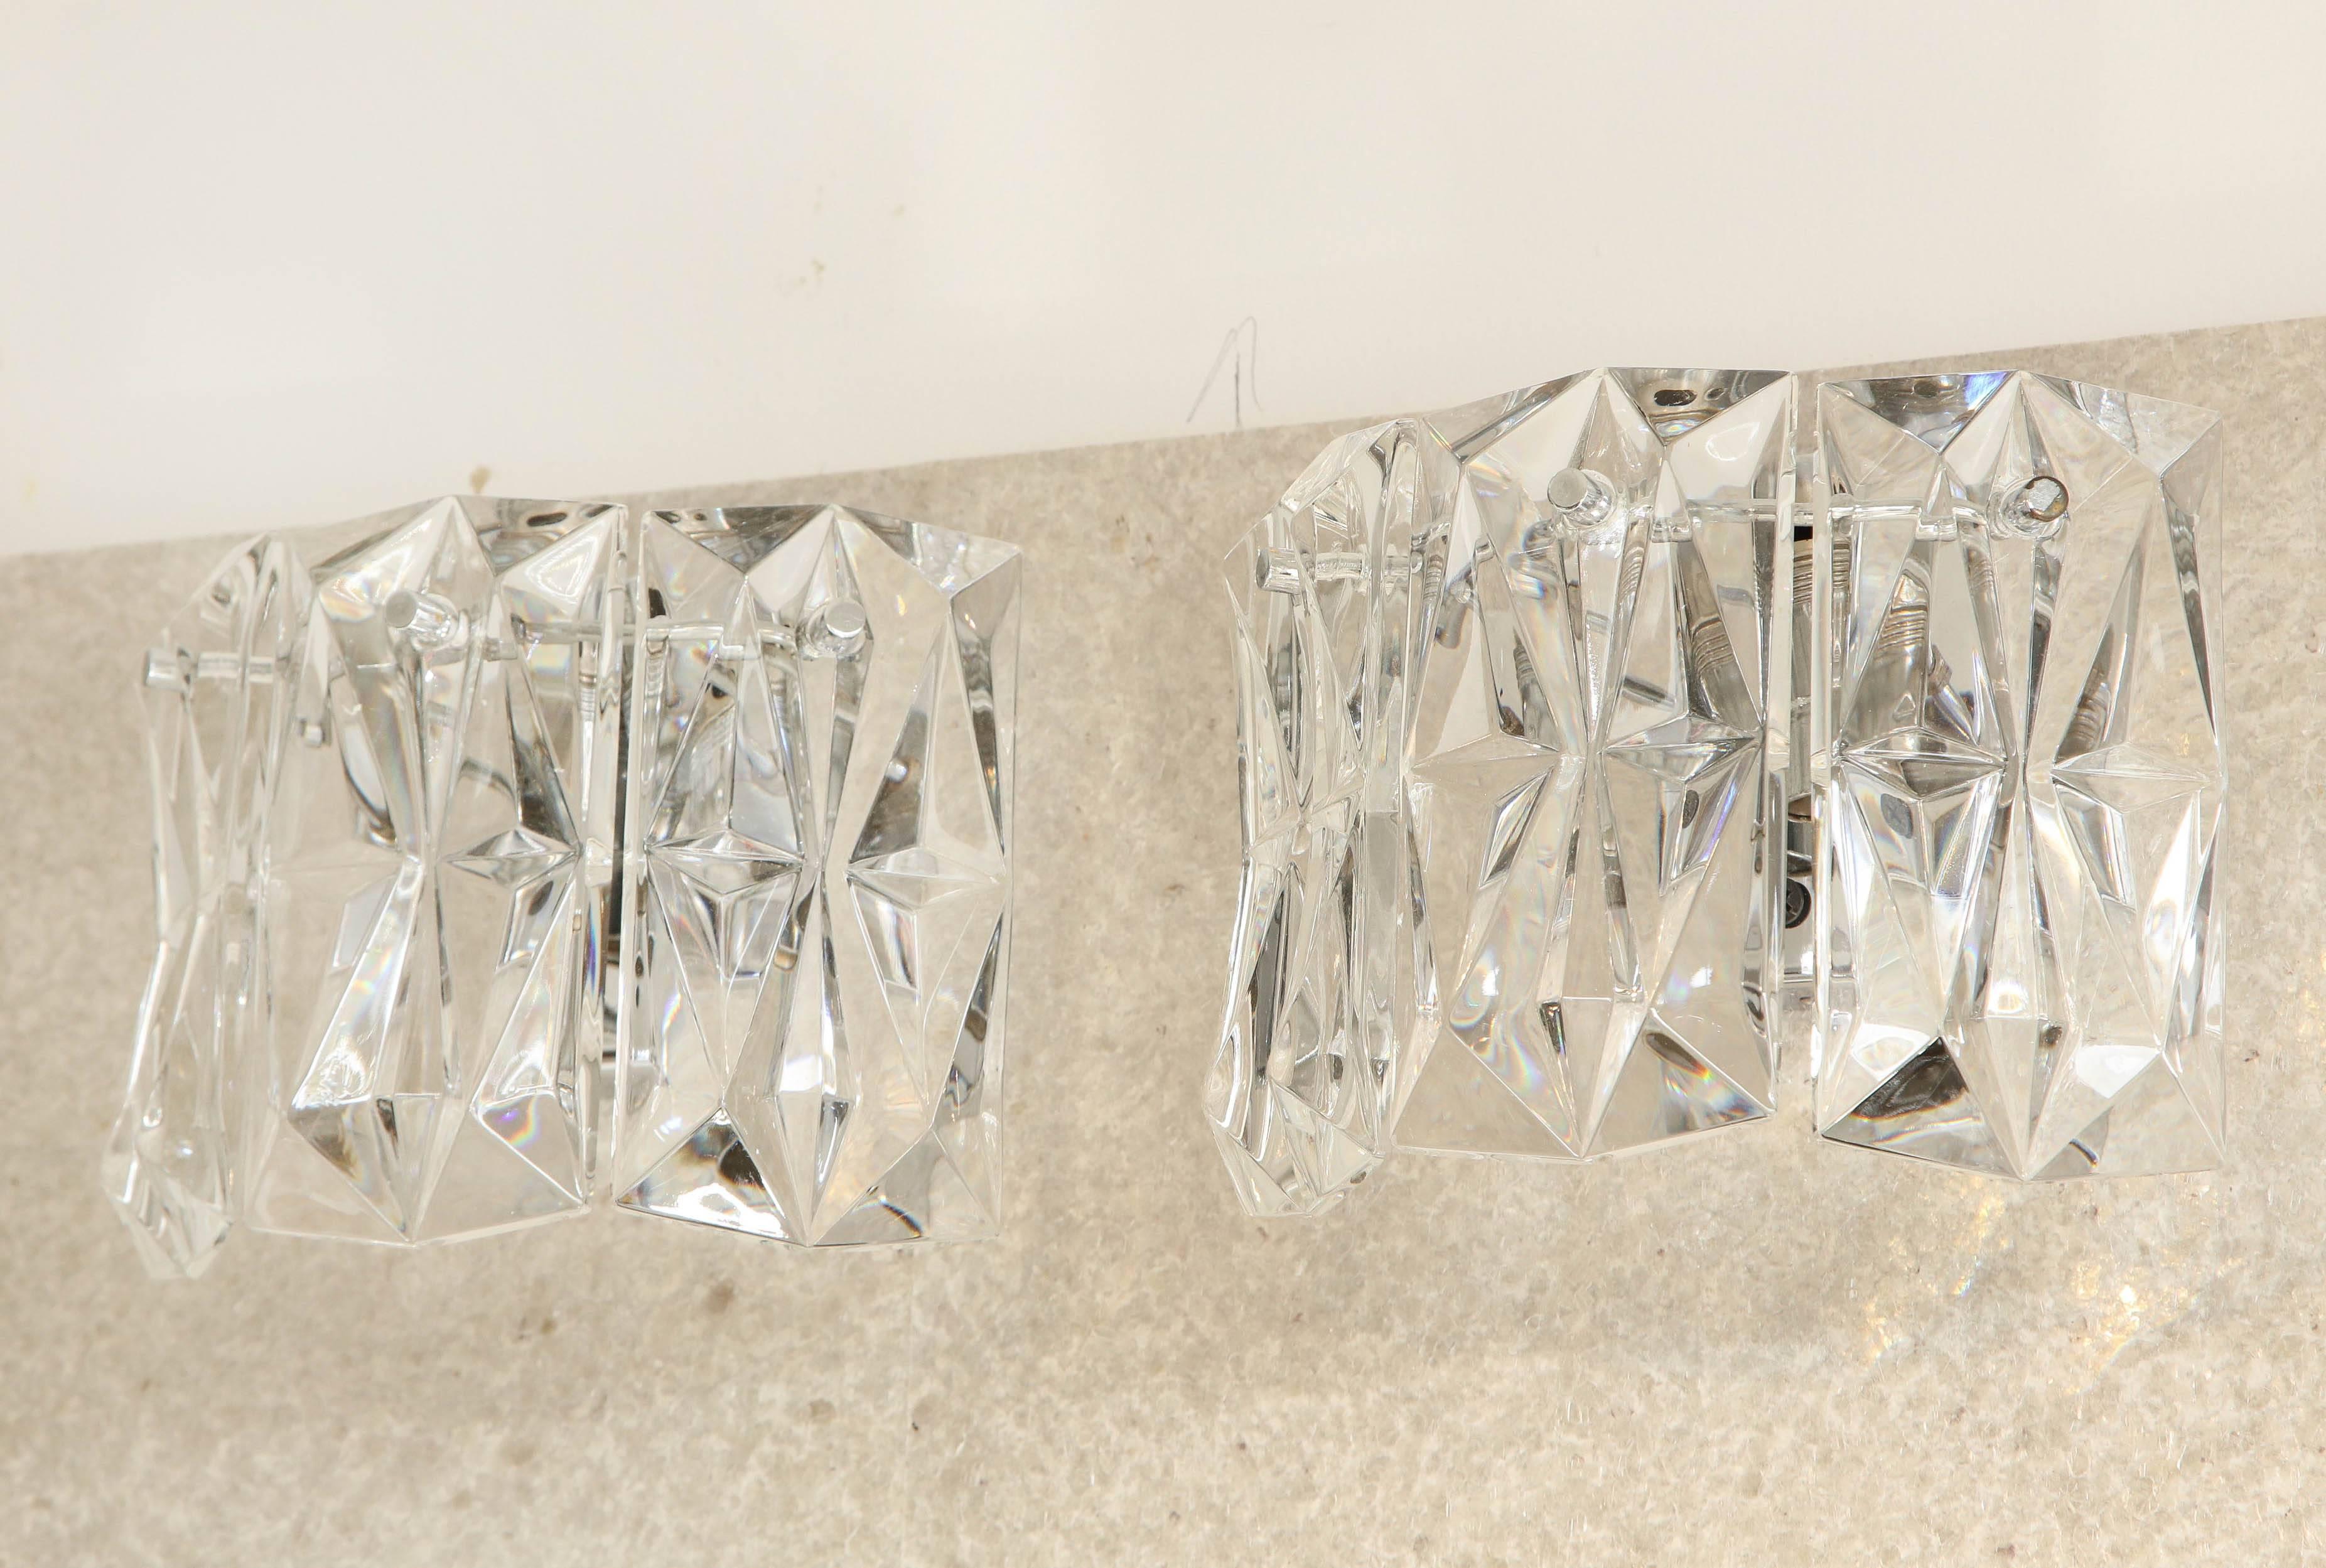 Set of 3 Austrian crystal sconces with rectangular faceted prisms on polished nickel backplates. Rewired for use in the USA.